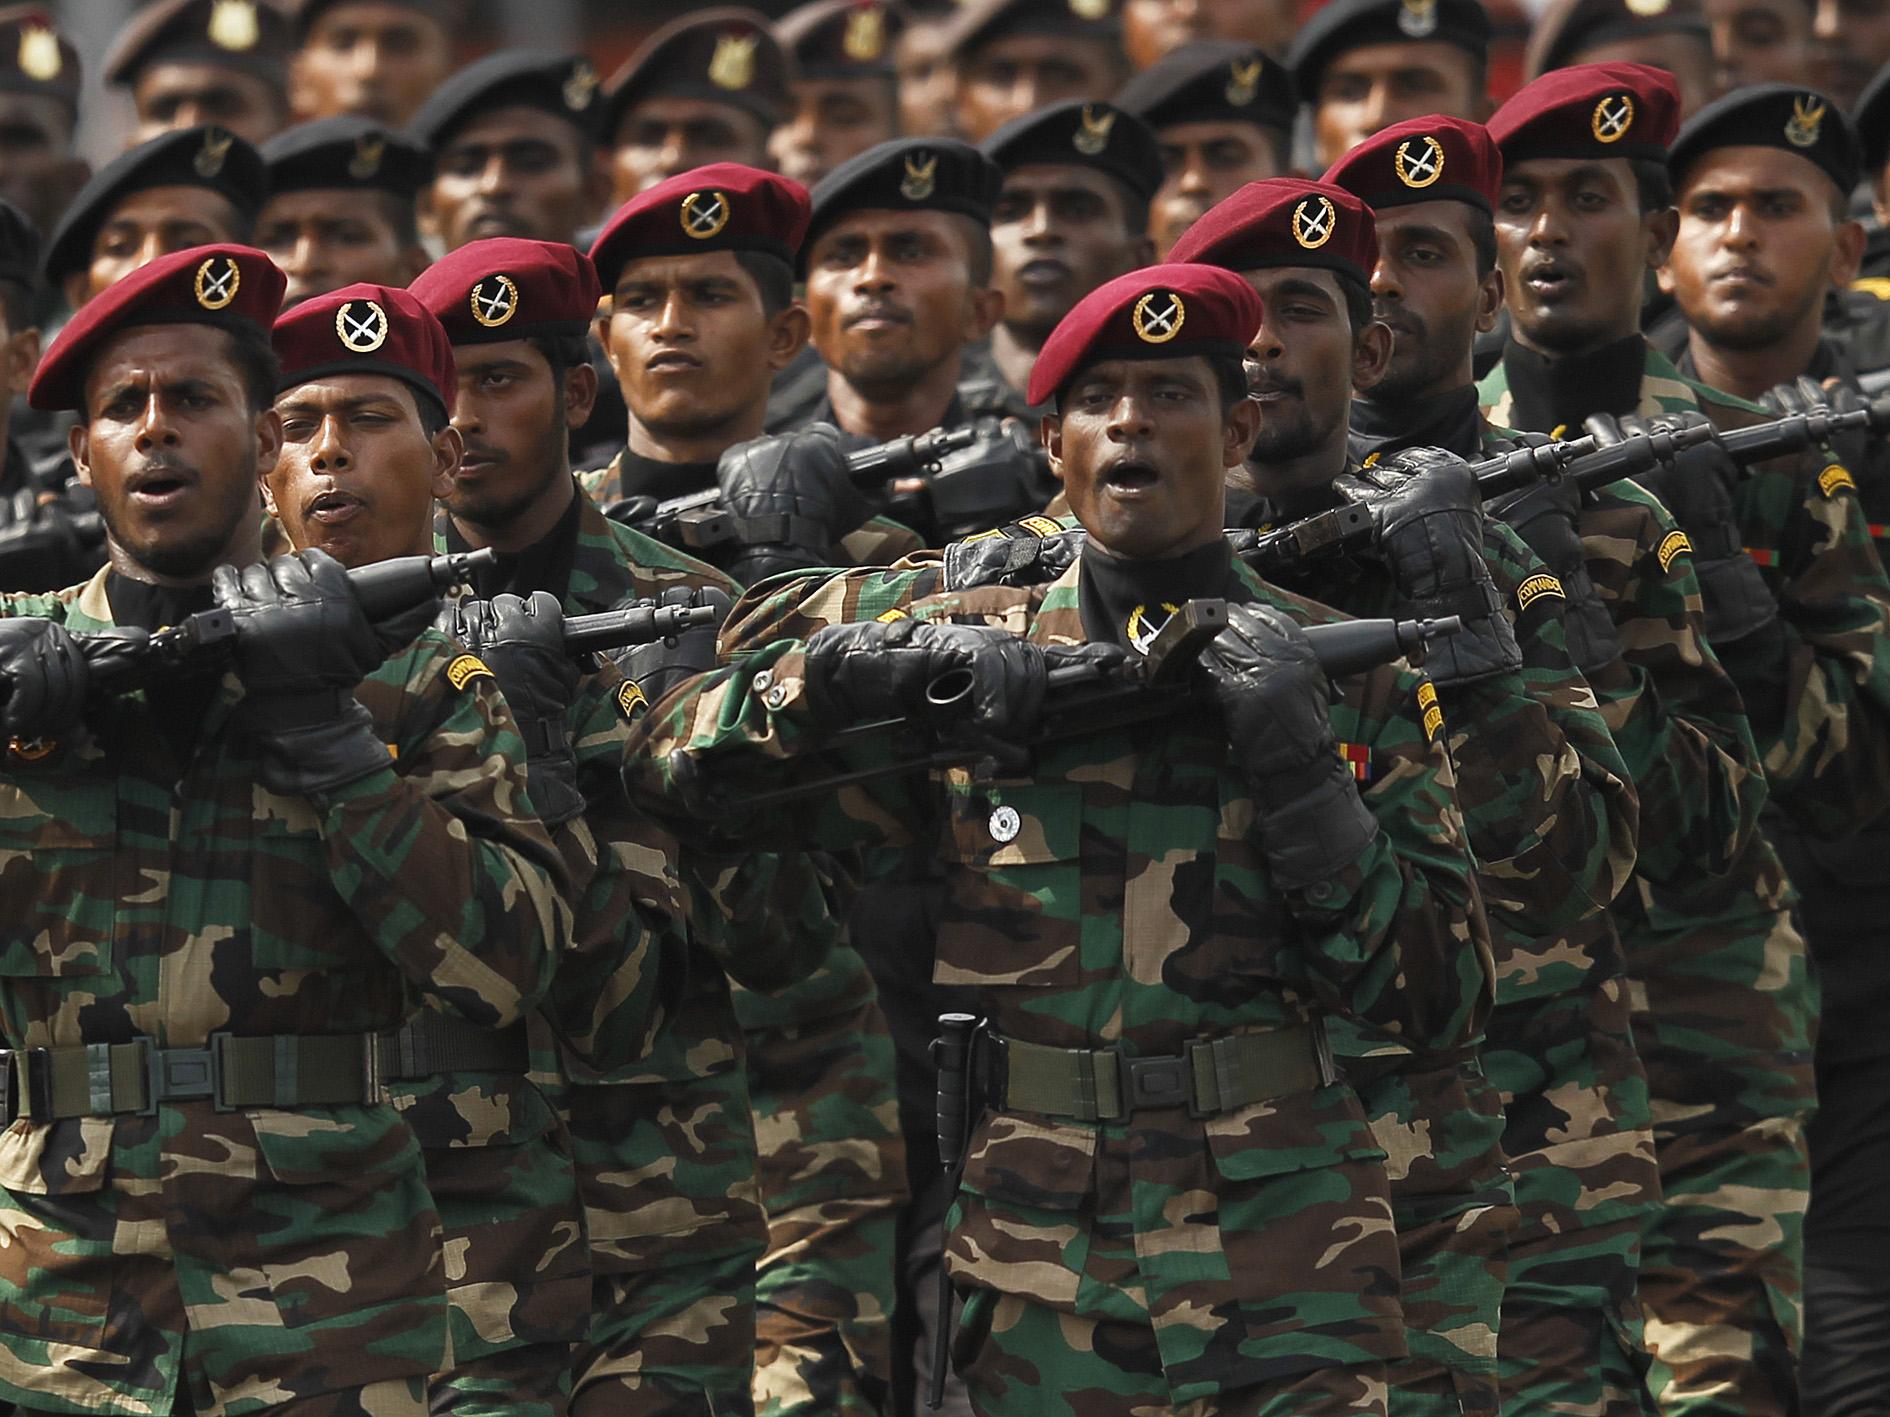 Sri Lankan army commandos march during a War Victory Parade in Colombo in 2013, marking the anniversary of the conflict's conclusion